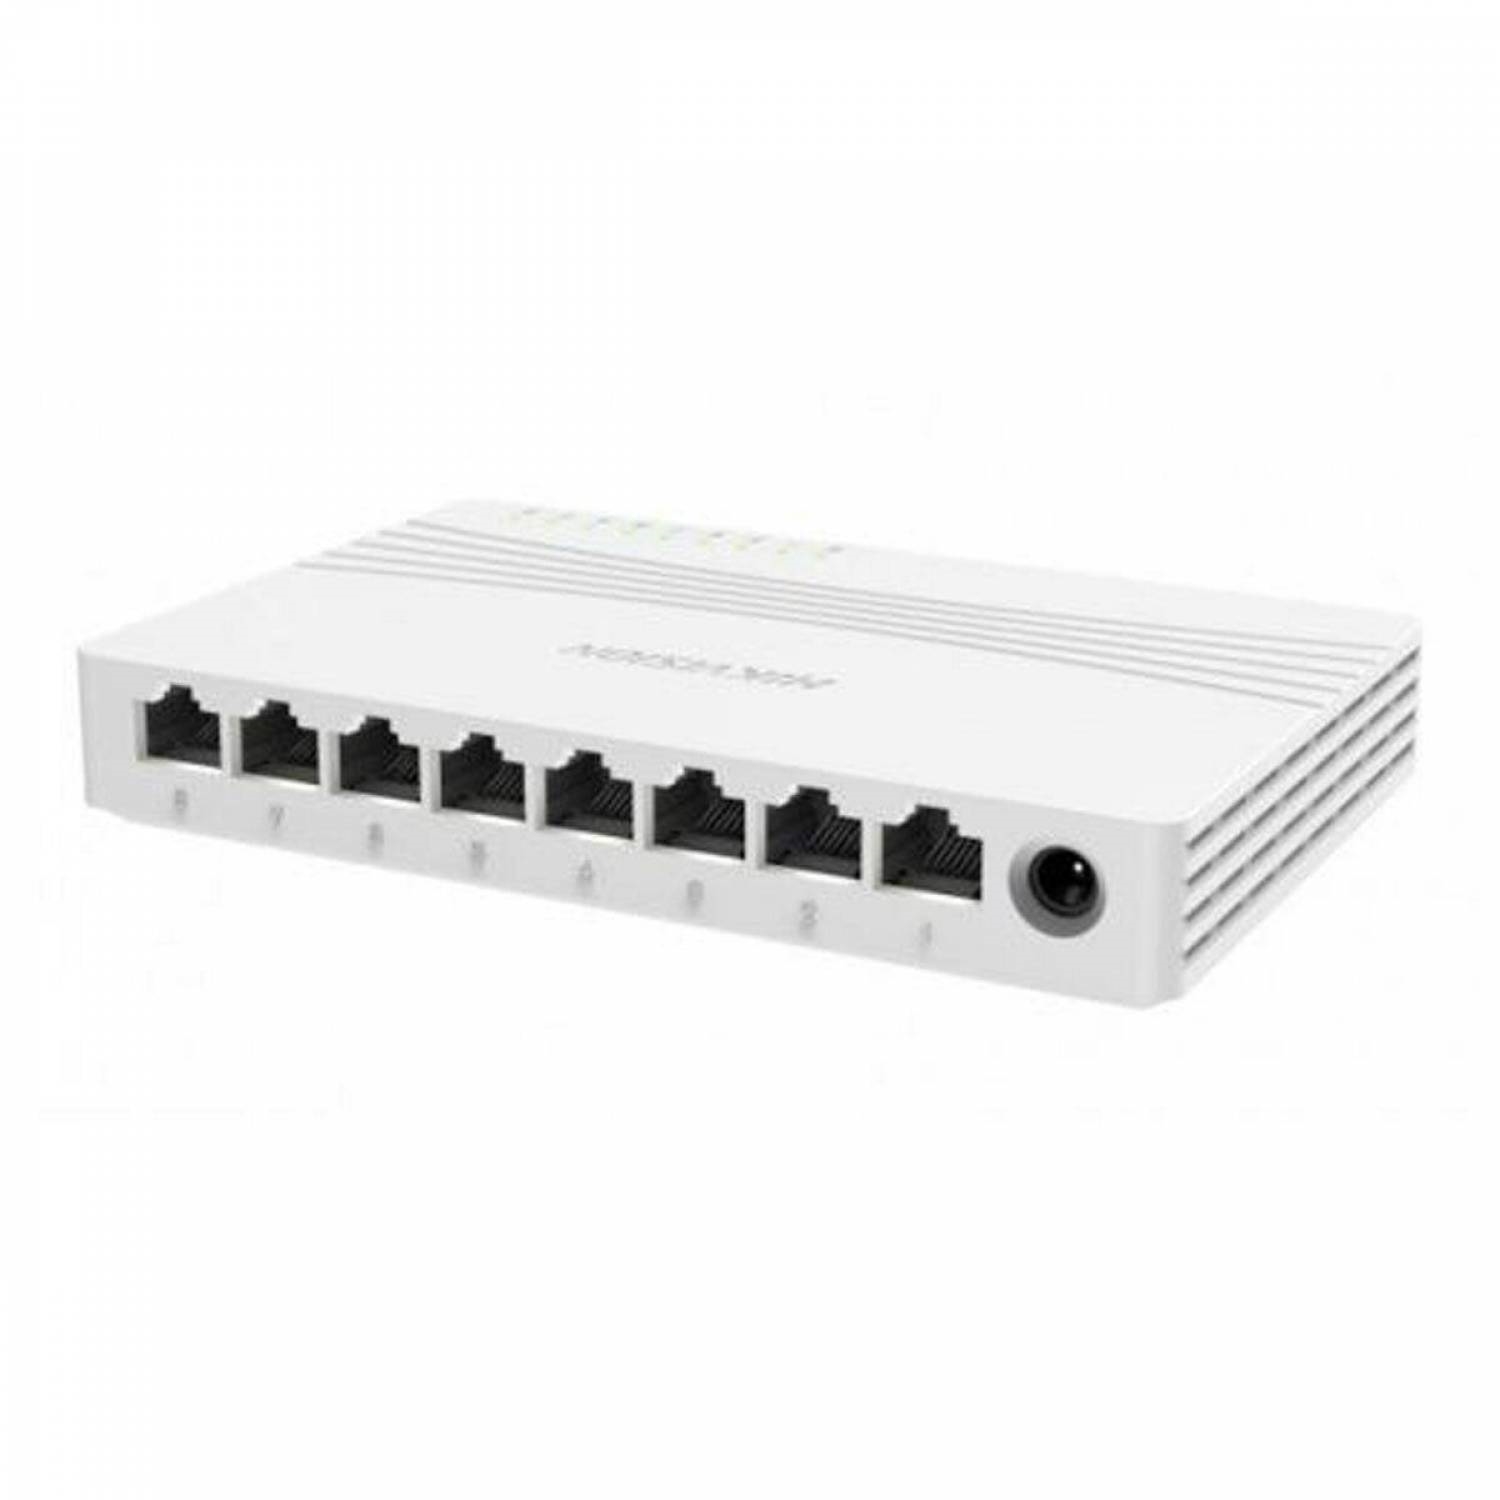 Picture of DS-3E0508D-E 8 Port Ethenet Switch up to 1000Mbps Hikvision